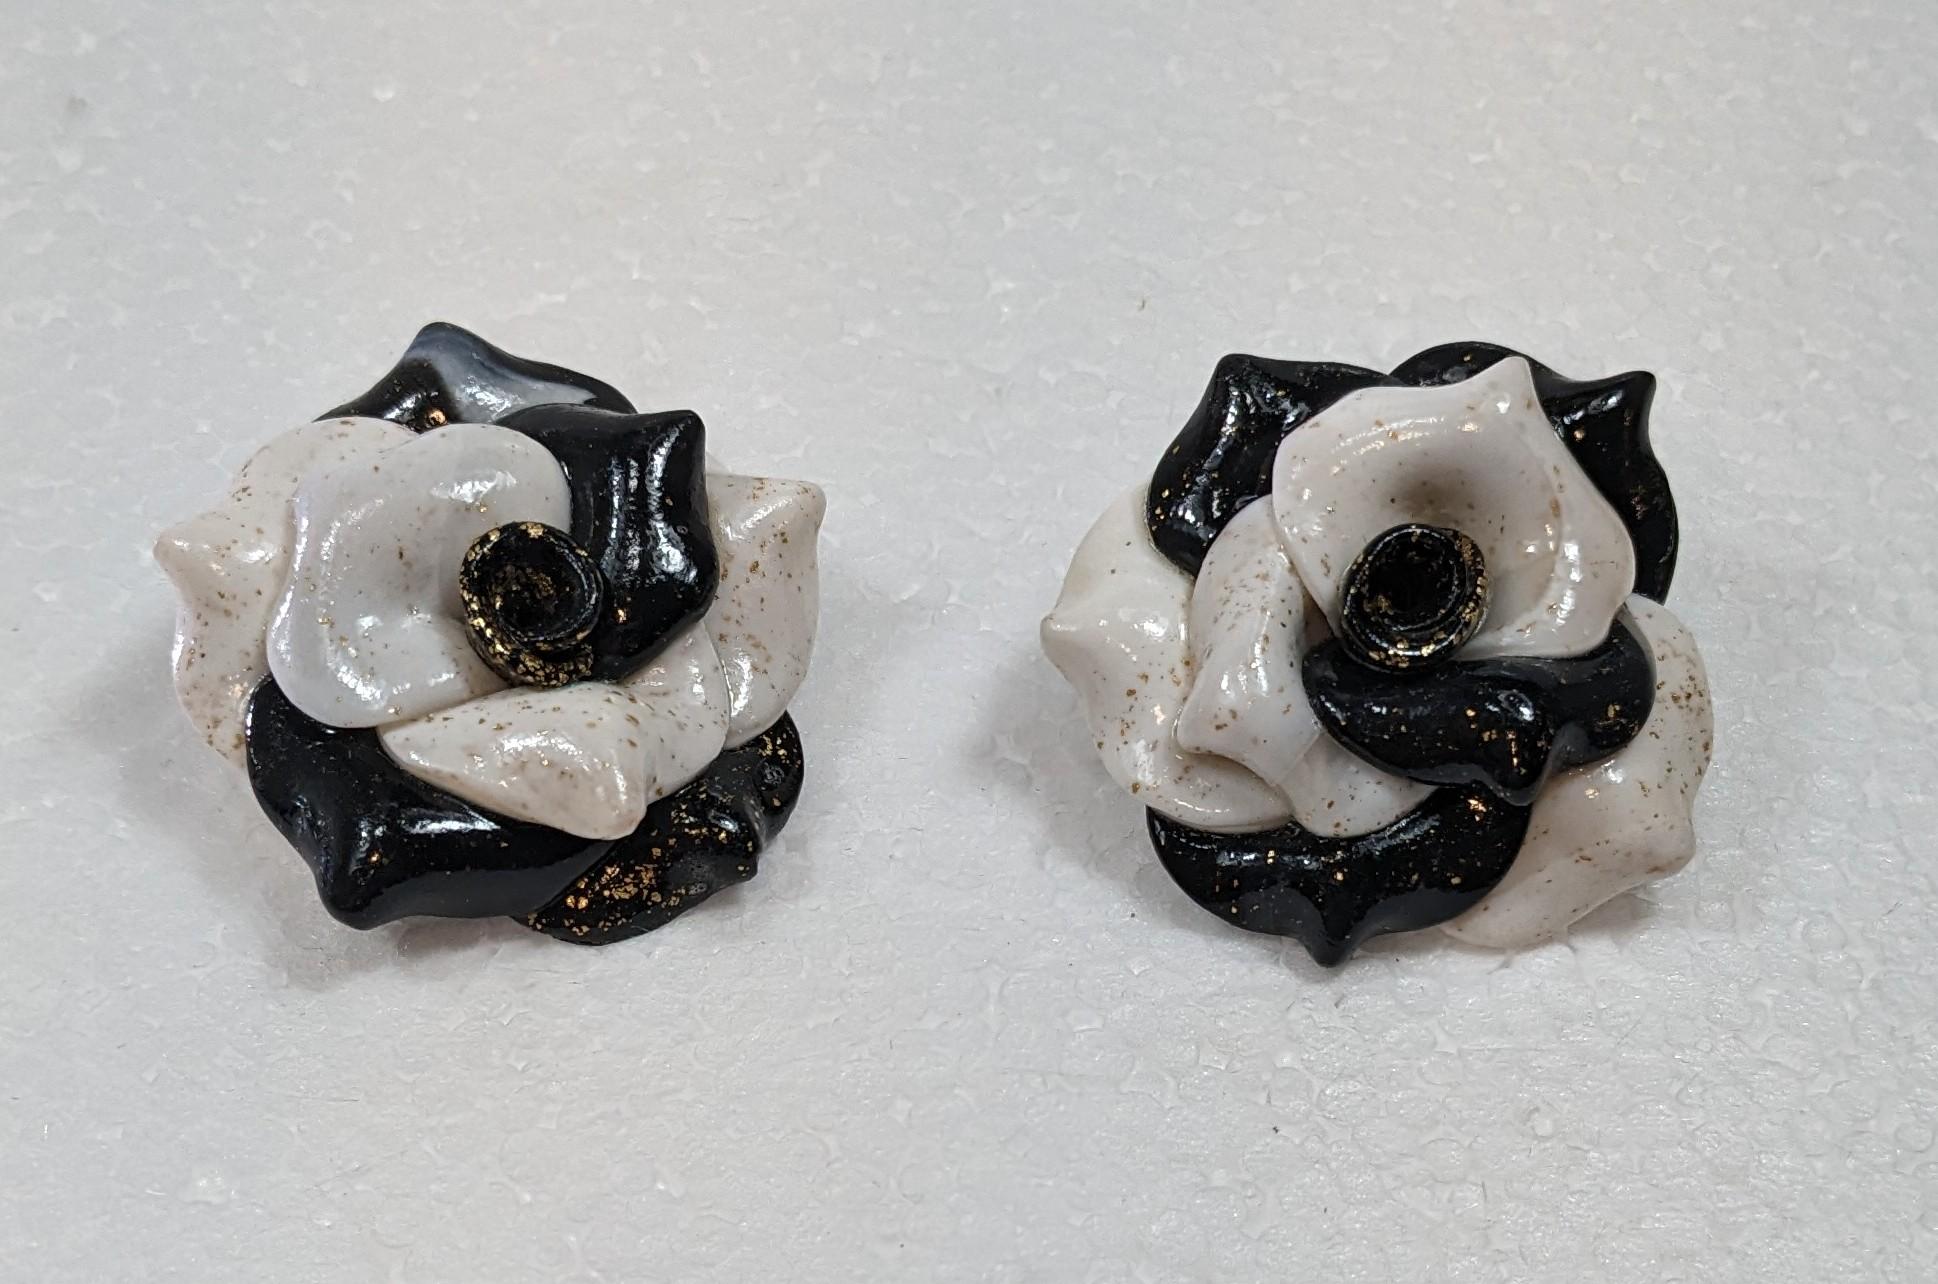 White Veined and Black Camelia Polymer Clay Earrings with golplated silver closure
Diameter: 4 cm
Weight: 15,9 grams
Color  White and Black
Handmade

Pradera Fashion Division  is specialized in European Fashion designers, clothing, handbags,